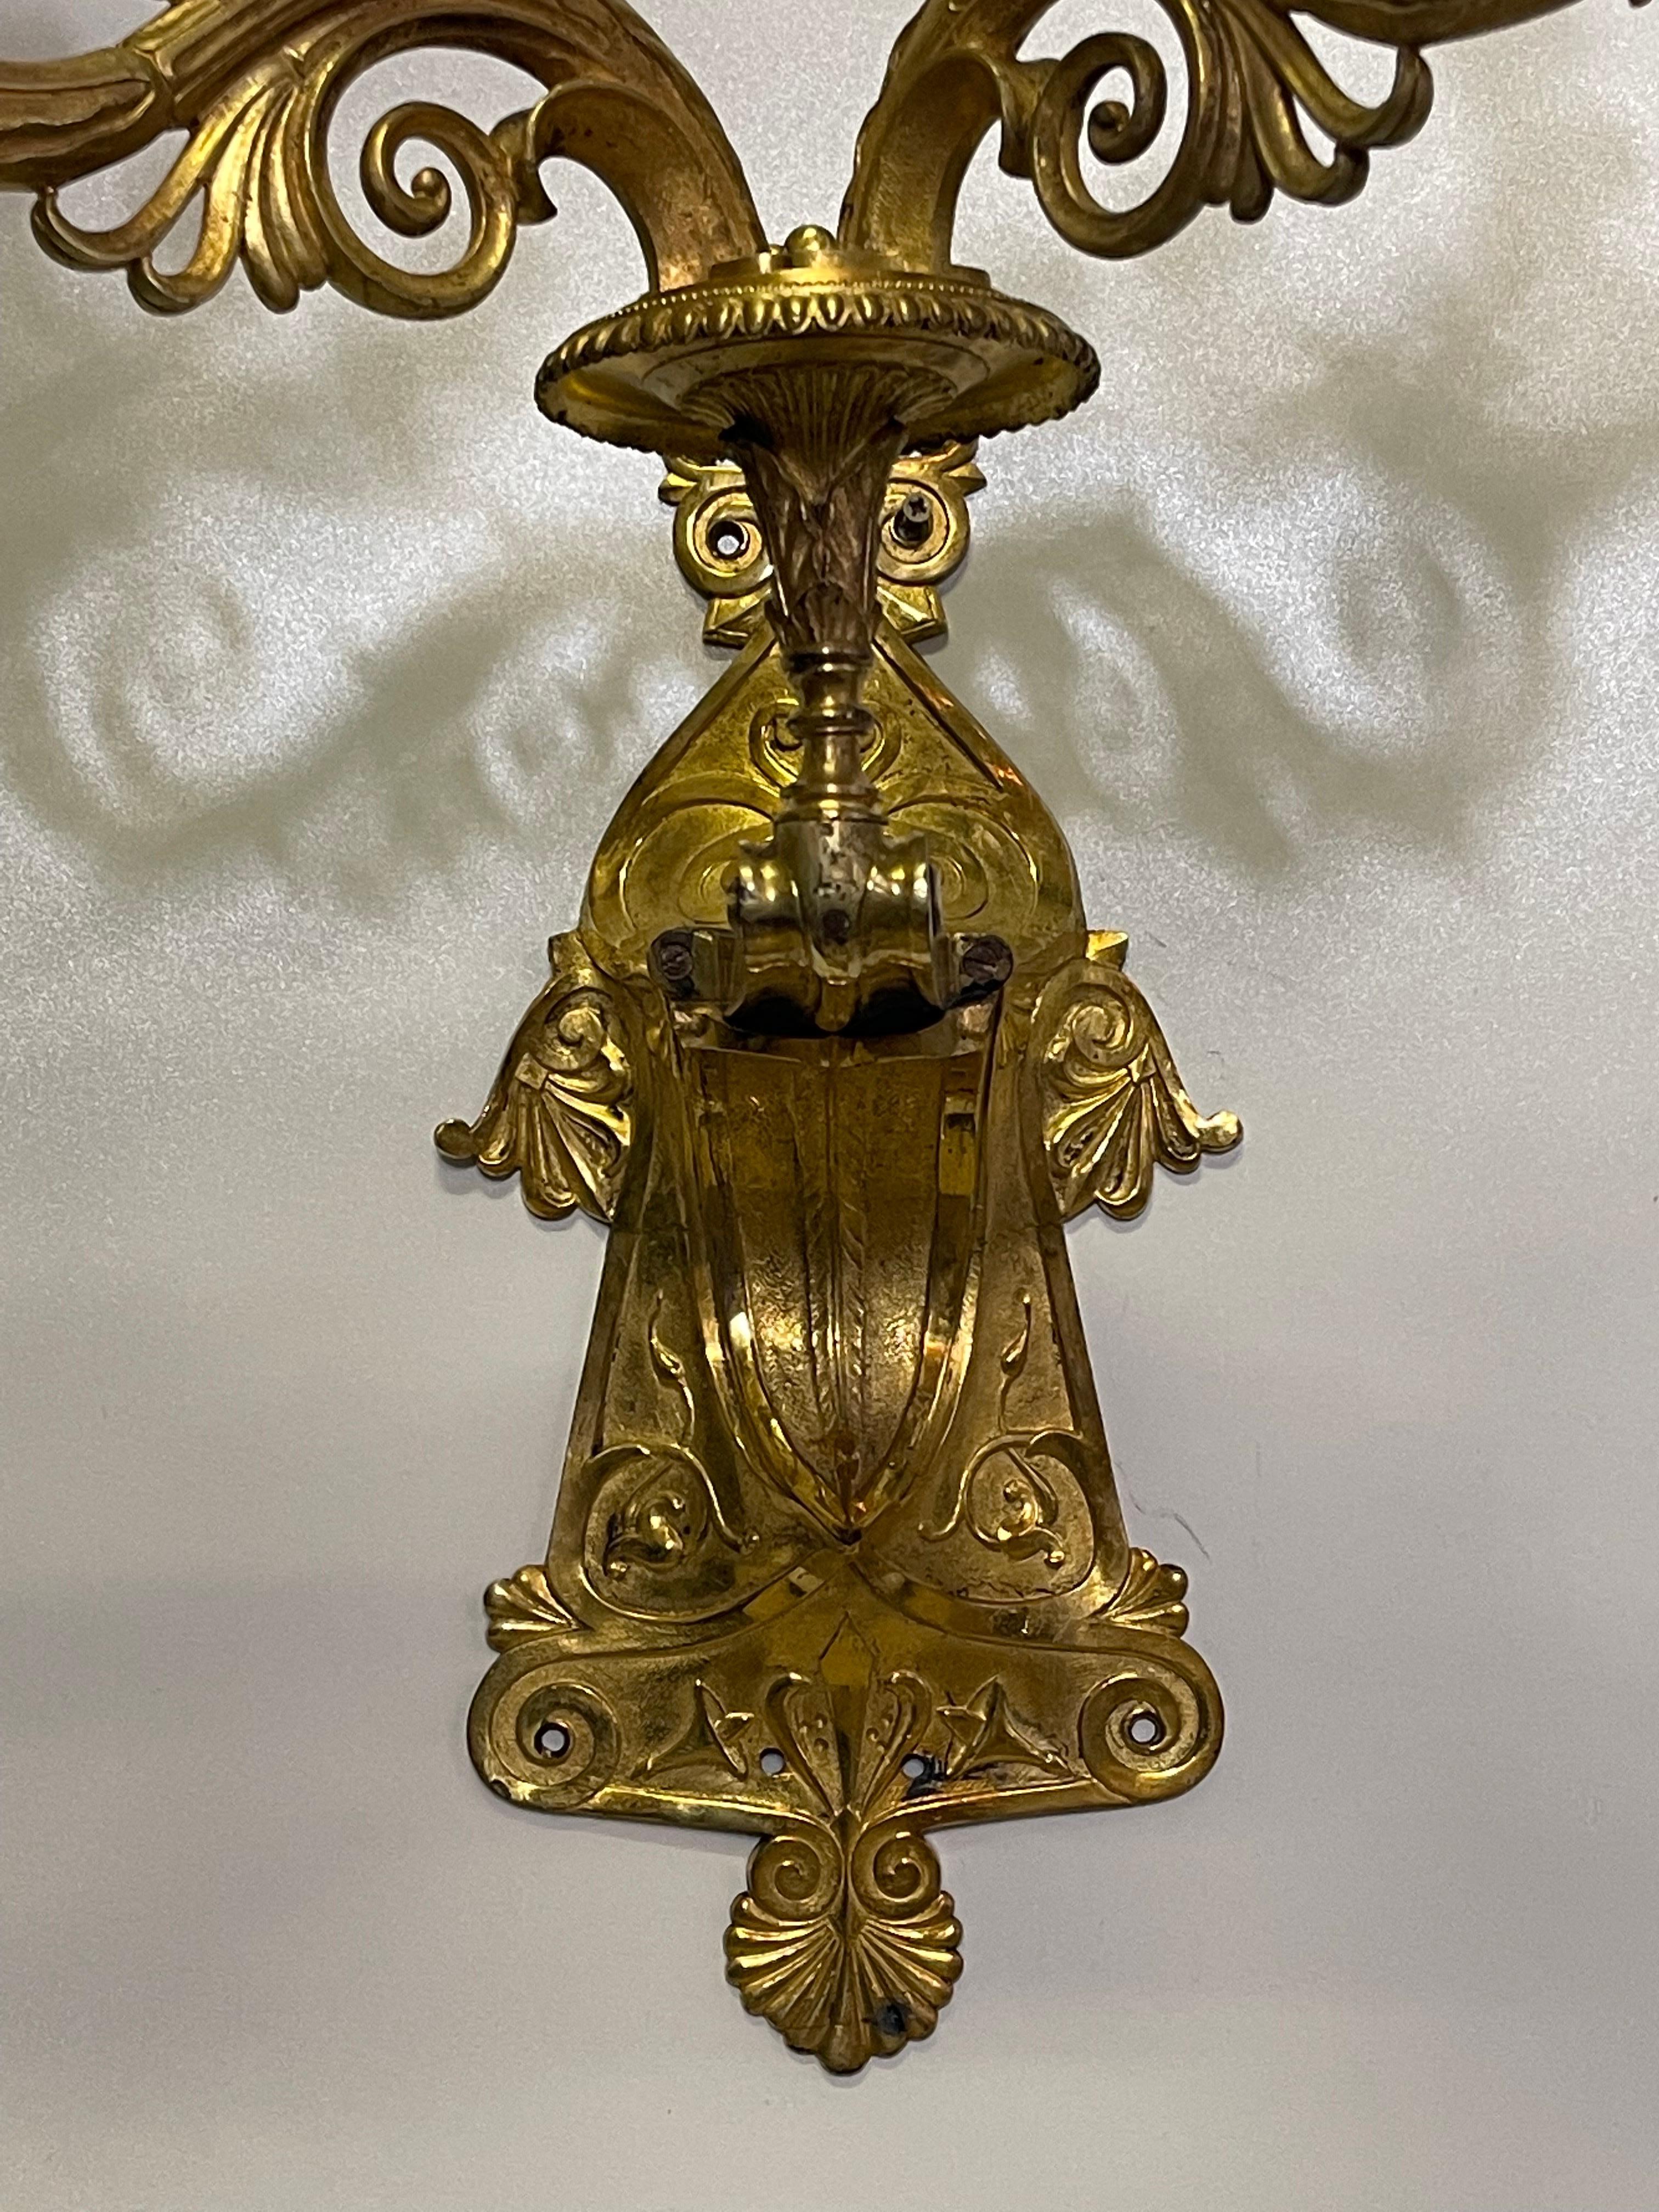 Pair of Stunning Russian Empire Period Ormolu Wall Sconces , ca. 1820s For Sale 7